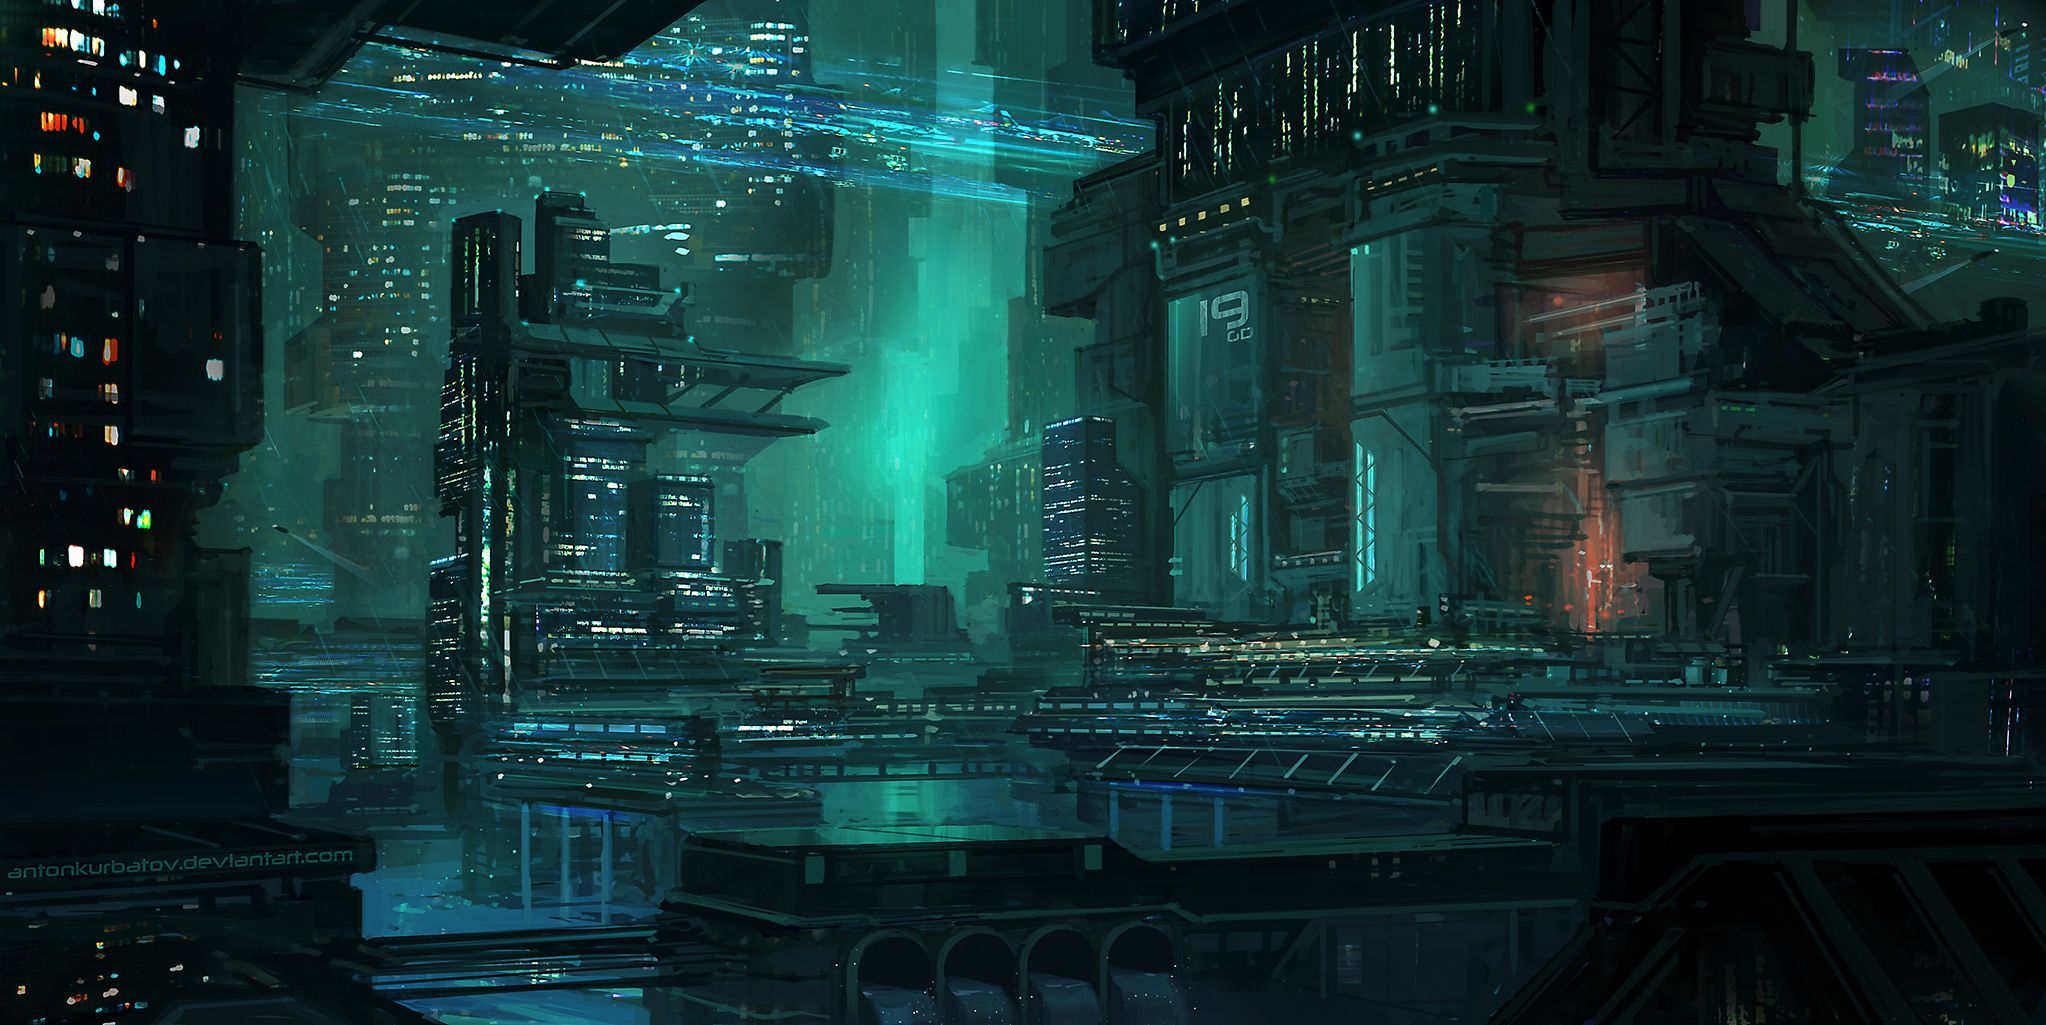 Bladerunner Building Digital Art And Drawing, HD Artist, 4k Wallpaper, Image, Background, Photo and Picture